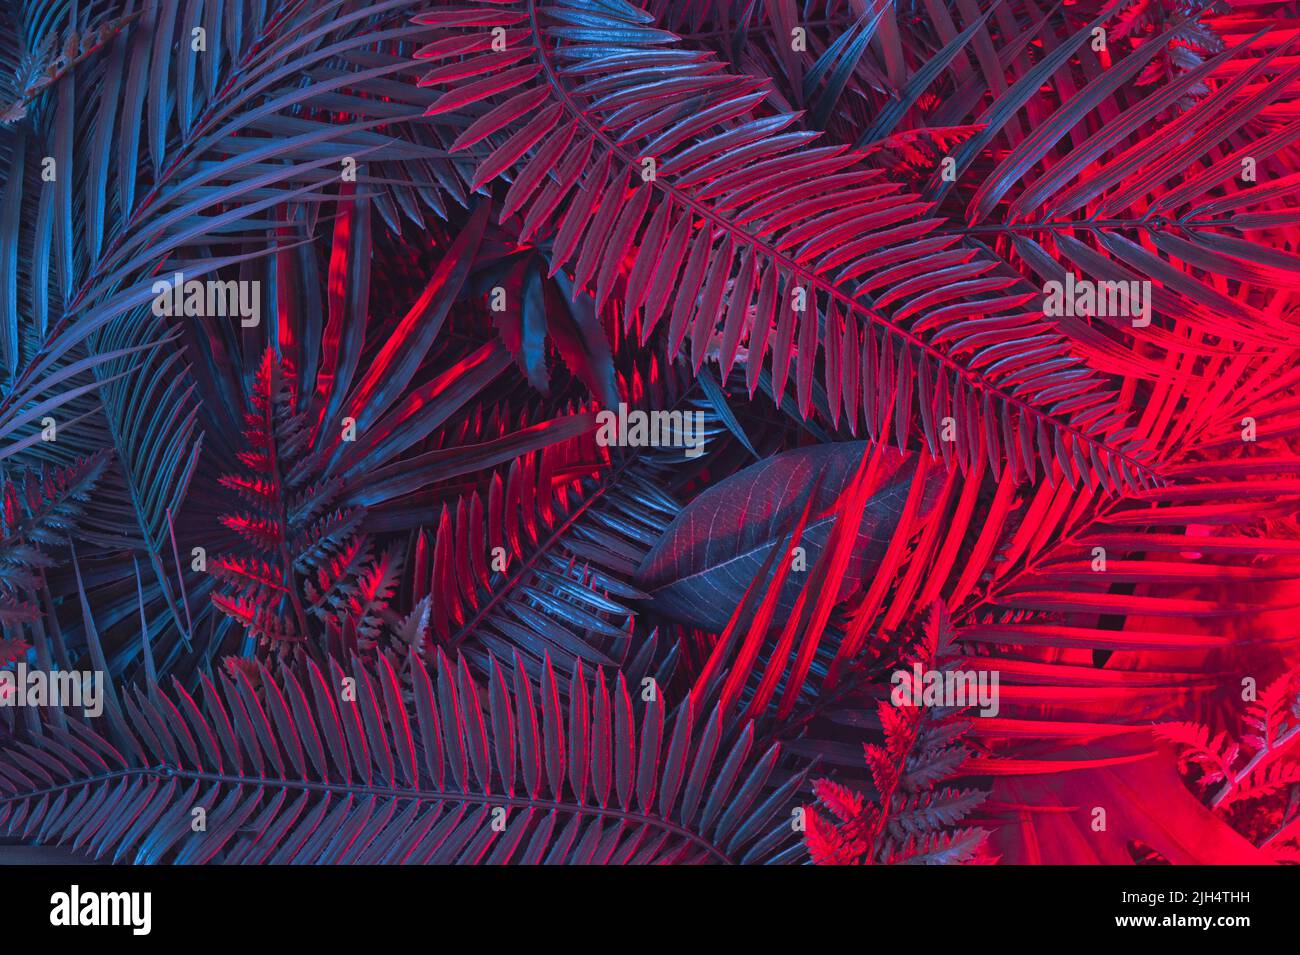 Tropical neon palm leaves in vibrant gradient  colors. Concept art. Minimal nature flat lay  floral image. Stock Photo